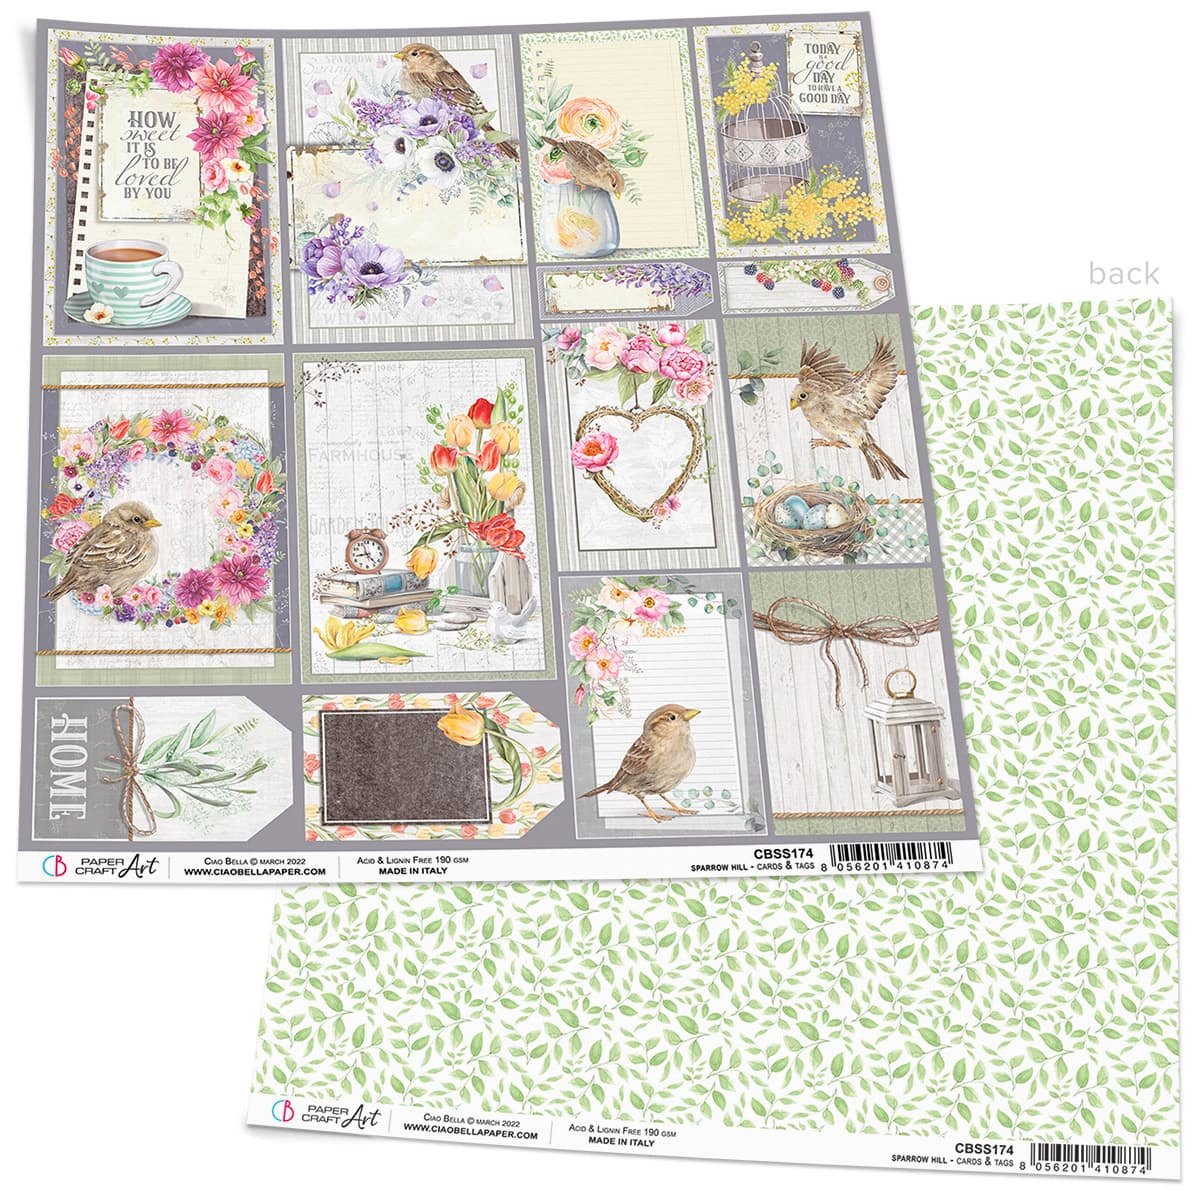 CIAO BELLA - SPARROW HILL CARDS & TAGS-  DOUBLE-SIDED PAPER SHEET 12"X12" -